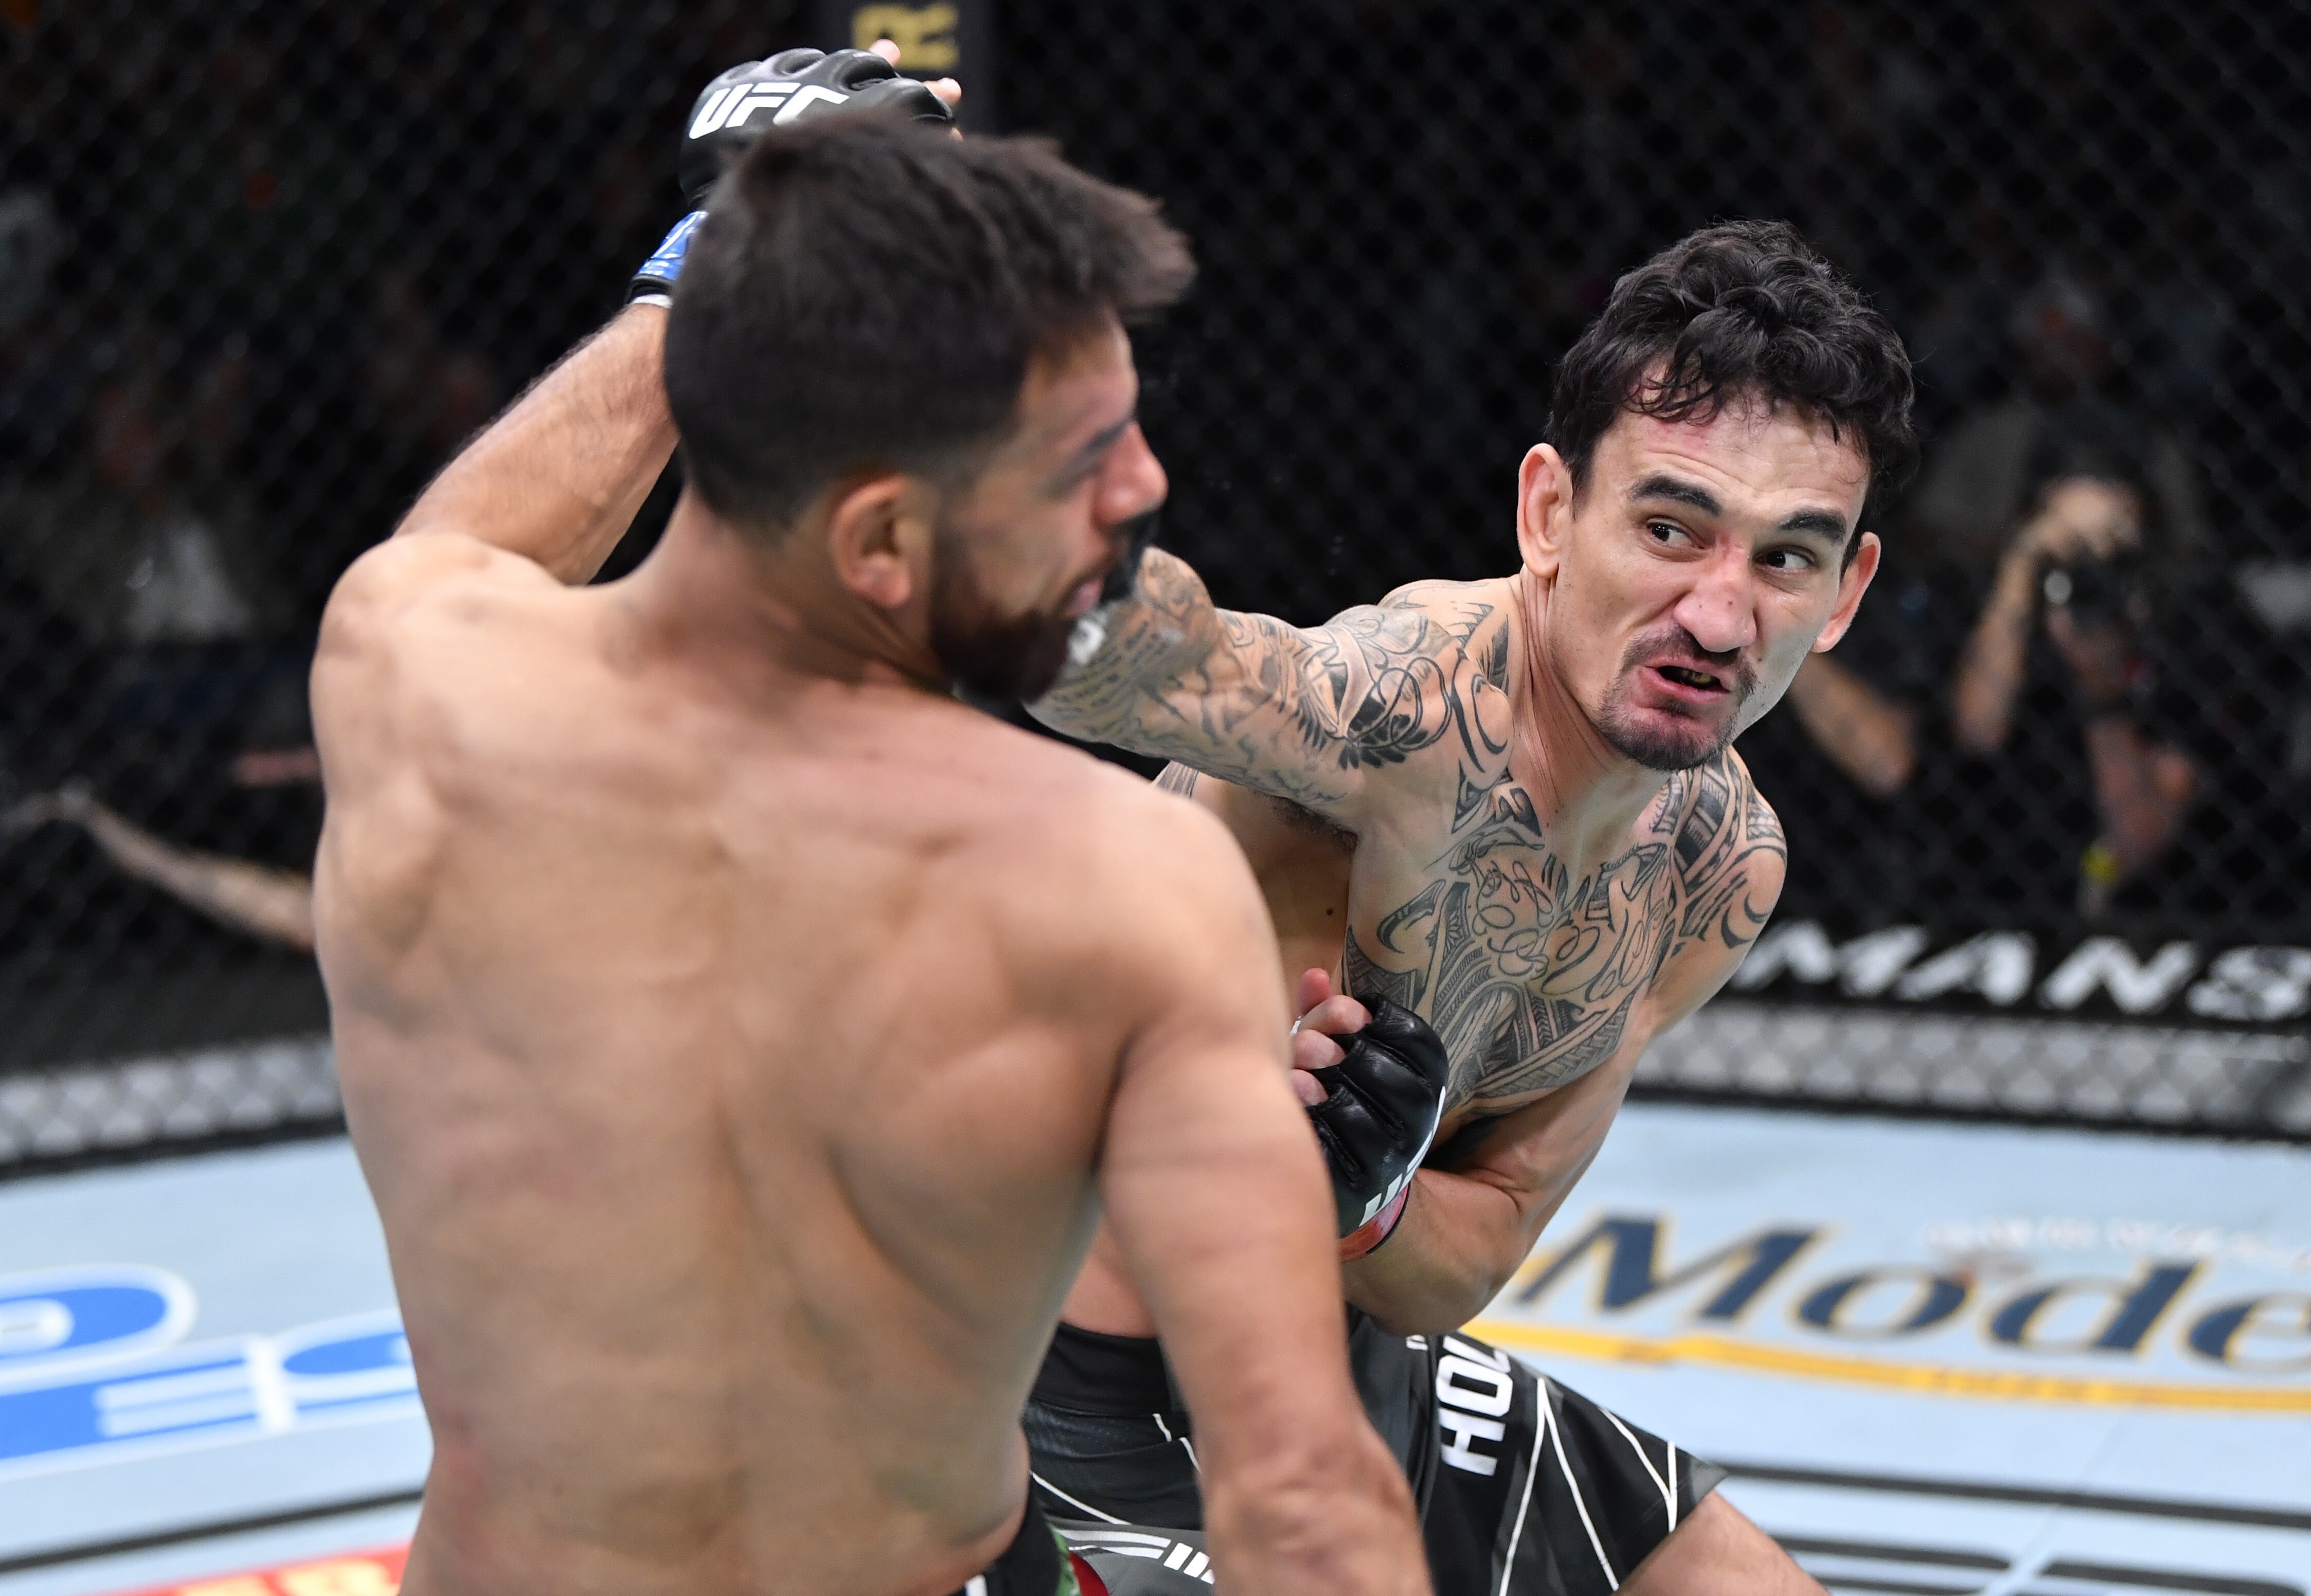 Max Holloway (right) lands a punch on Yair Rodriguez during their featherweight fight in Las Vegas. Photo: Zuffa LLC